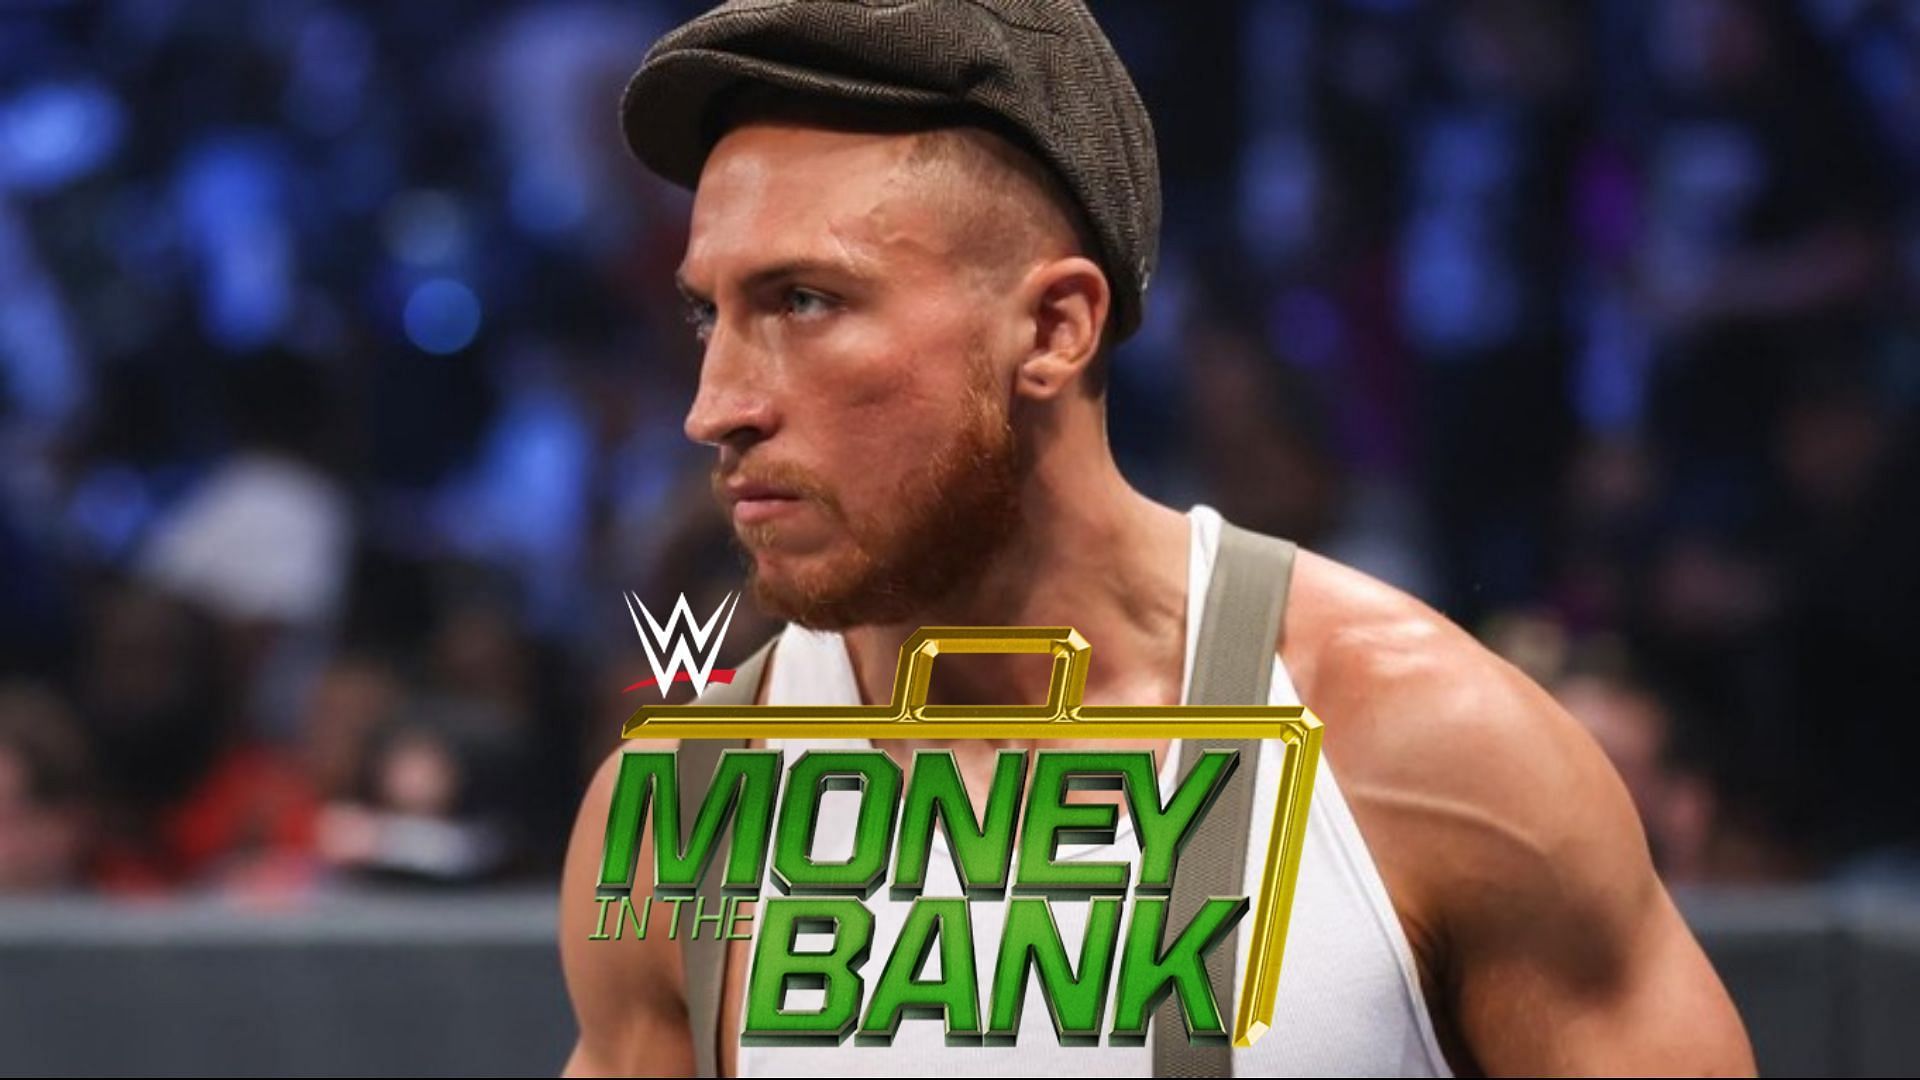 Could Money in the Bank this year feature a surprise win?